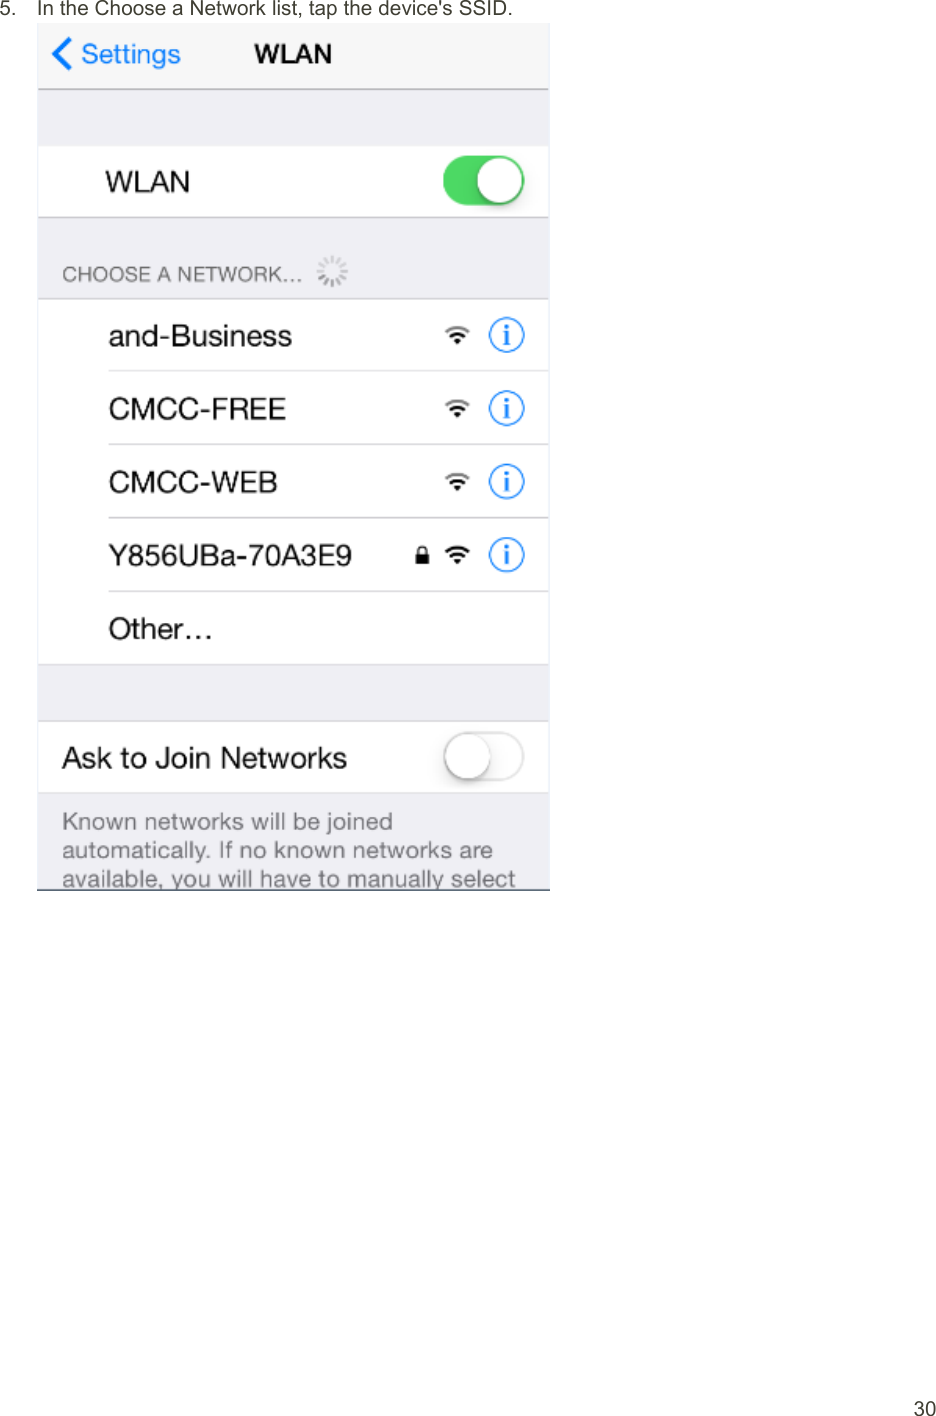  30 5. In the Choose a Network list, tap the device&apos;s SSID.  